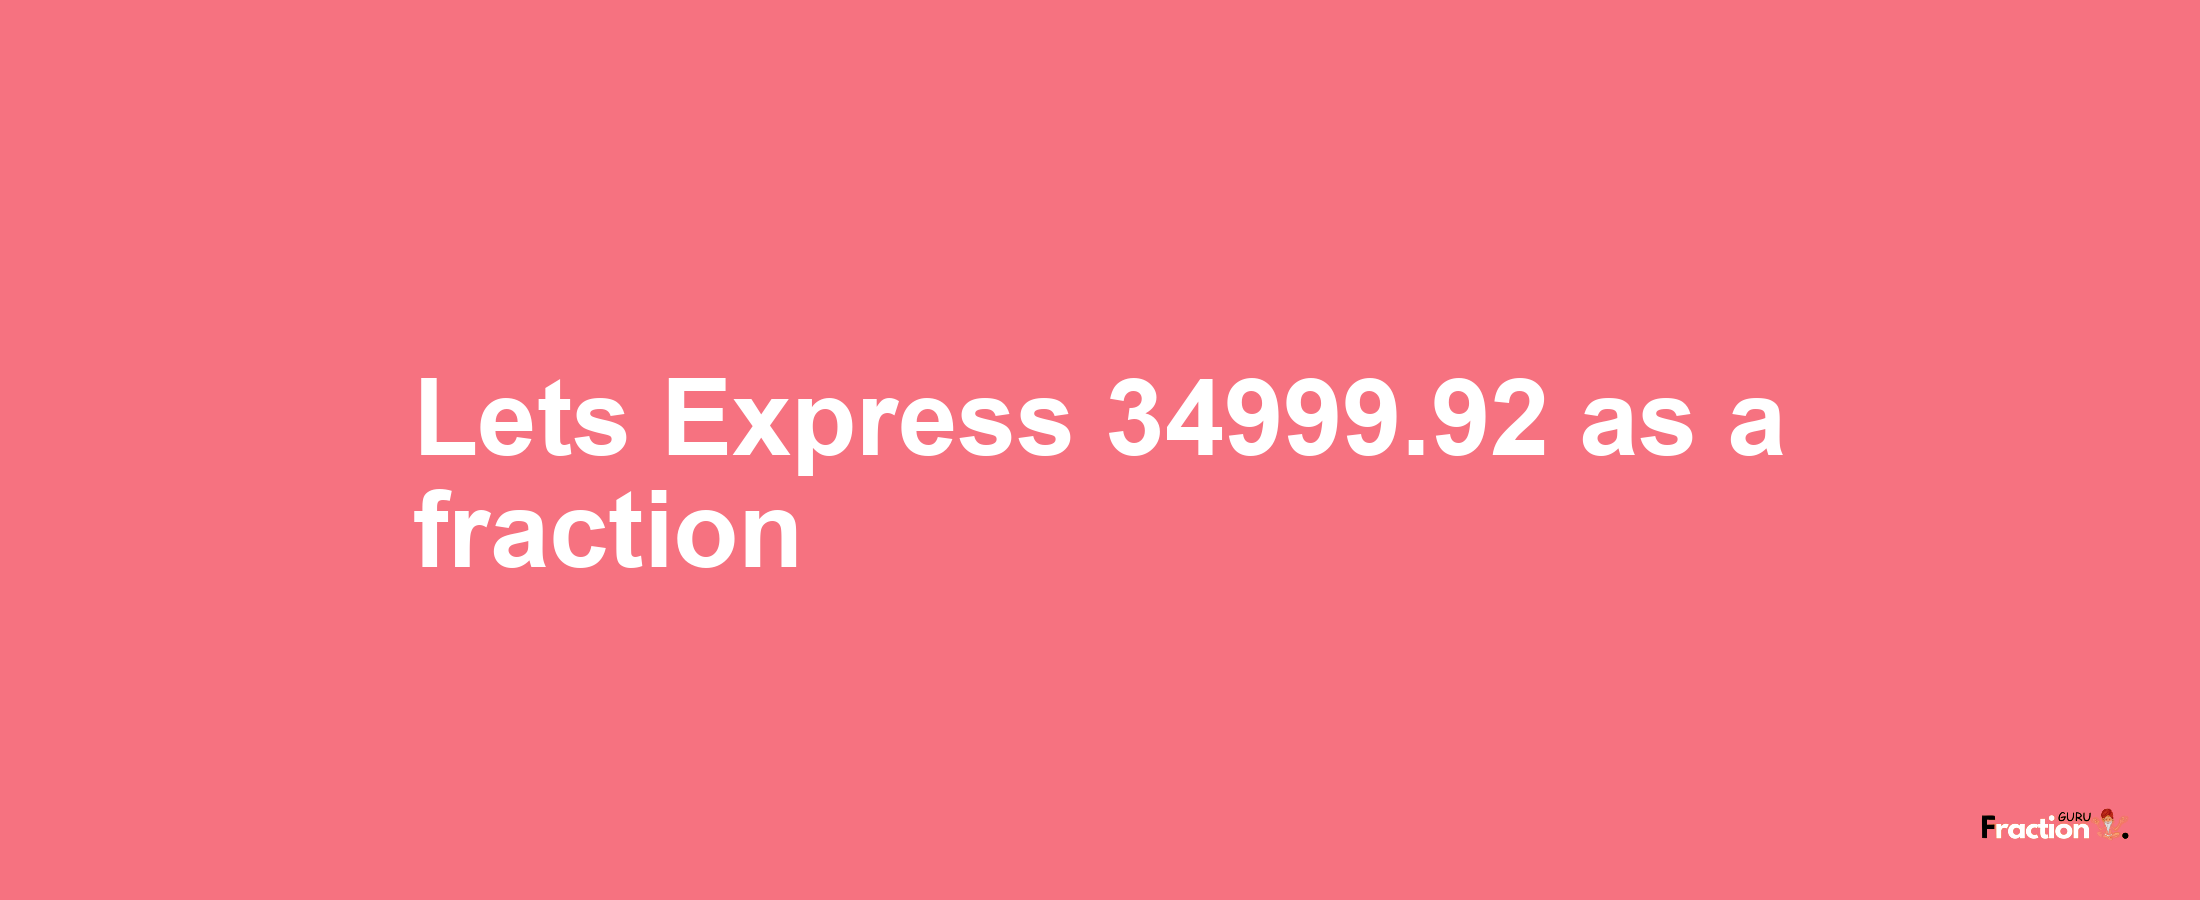 Lets Express 34999.92 as afraction